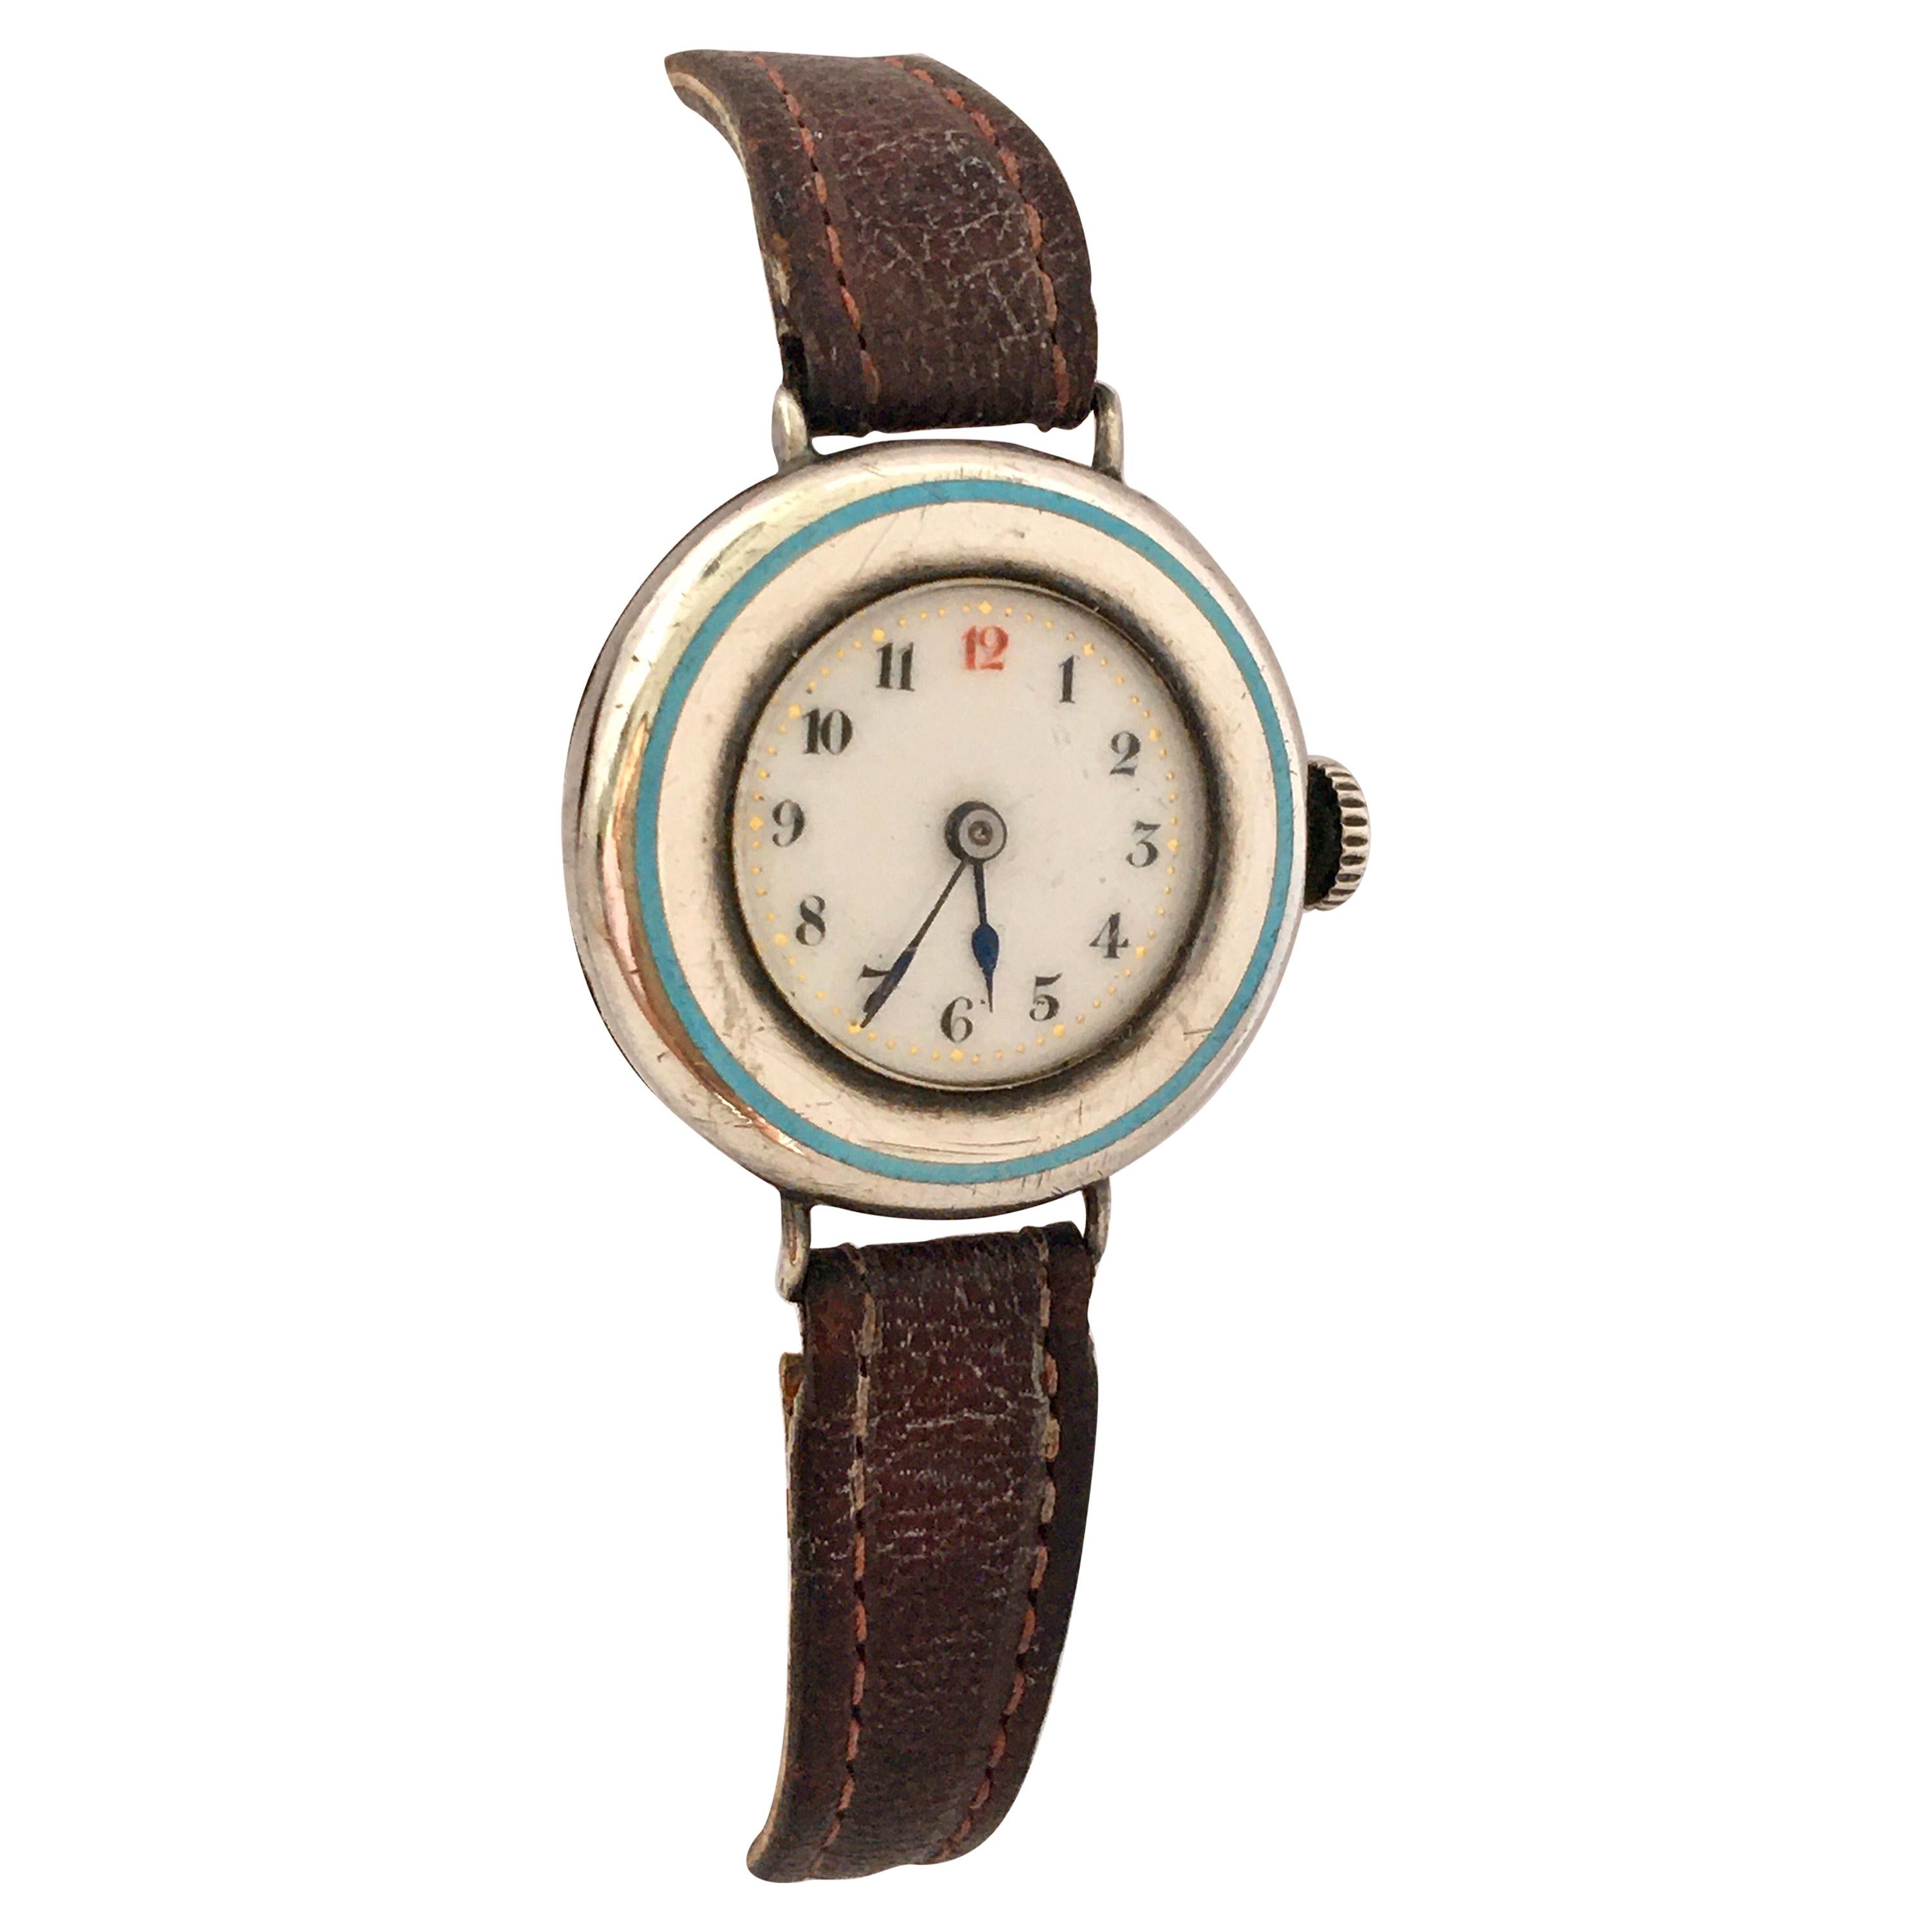 Antique Silver / Enamel Trench Watch